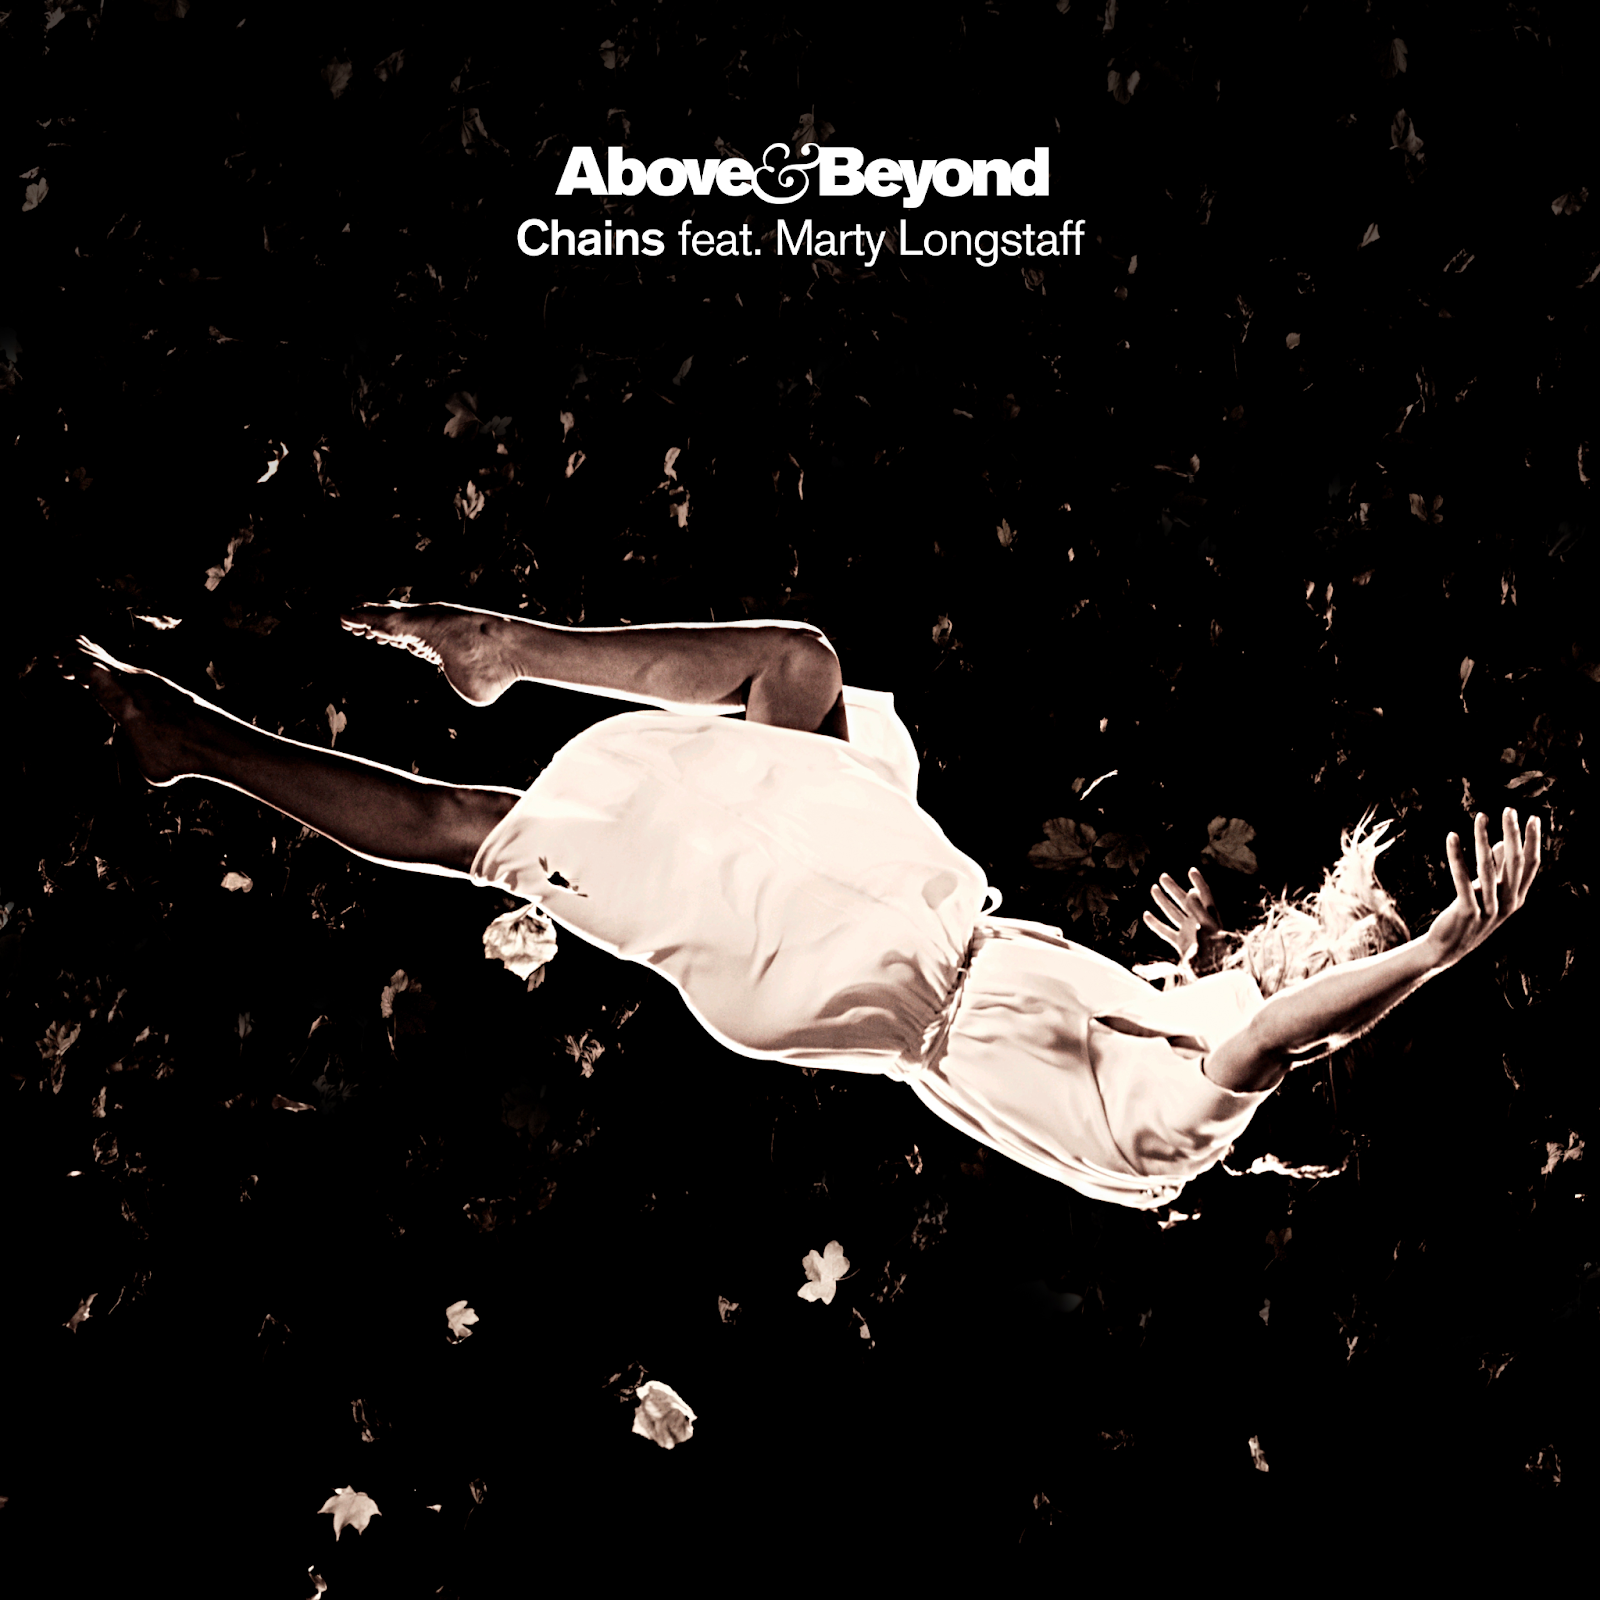 Above and Beyond feat. Marty Longstaff presents Chains on Anjunabeats